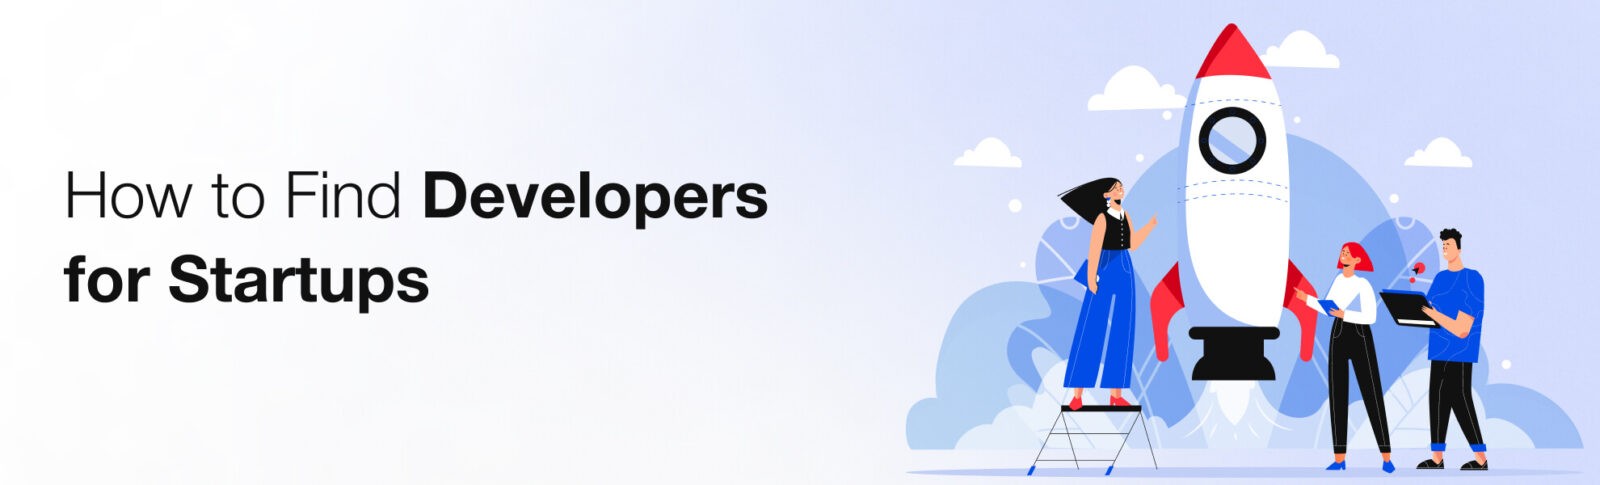 How to Find Developers for Startups